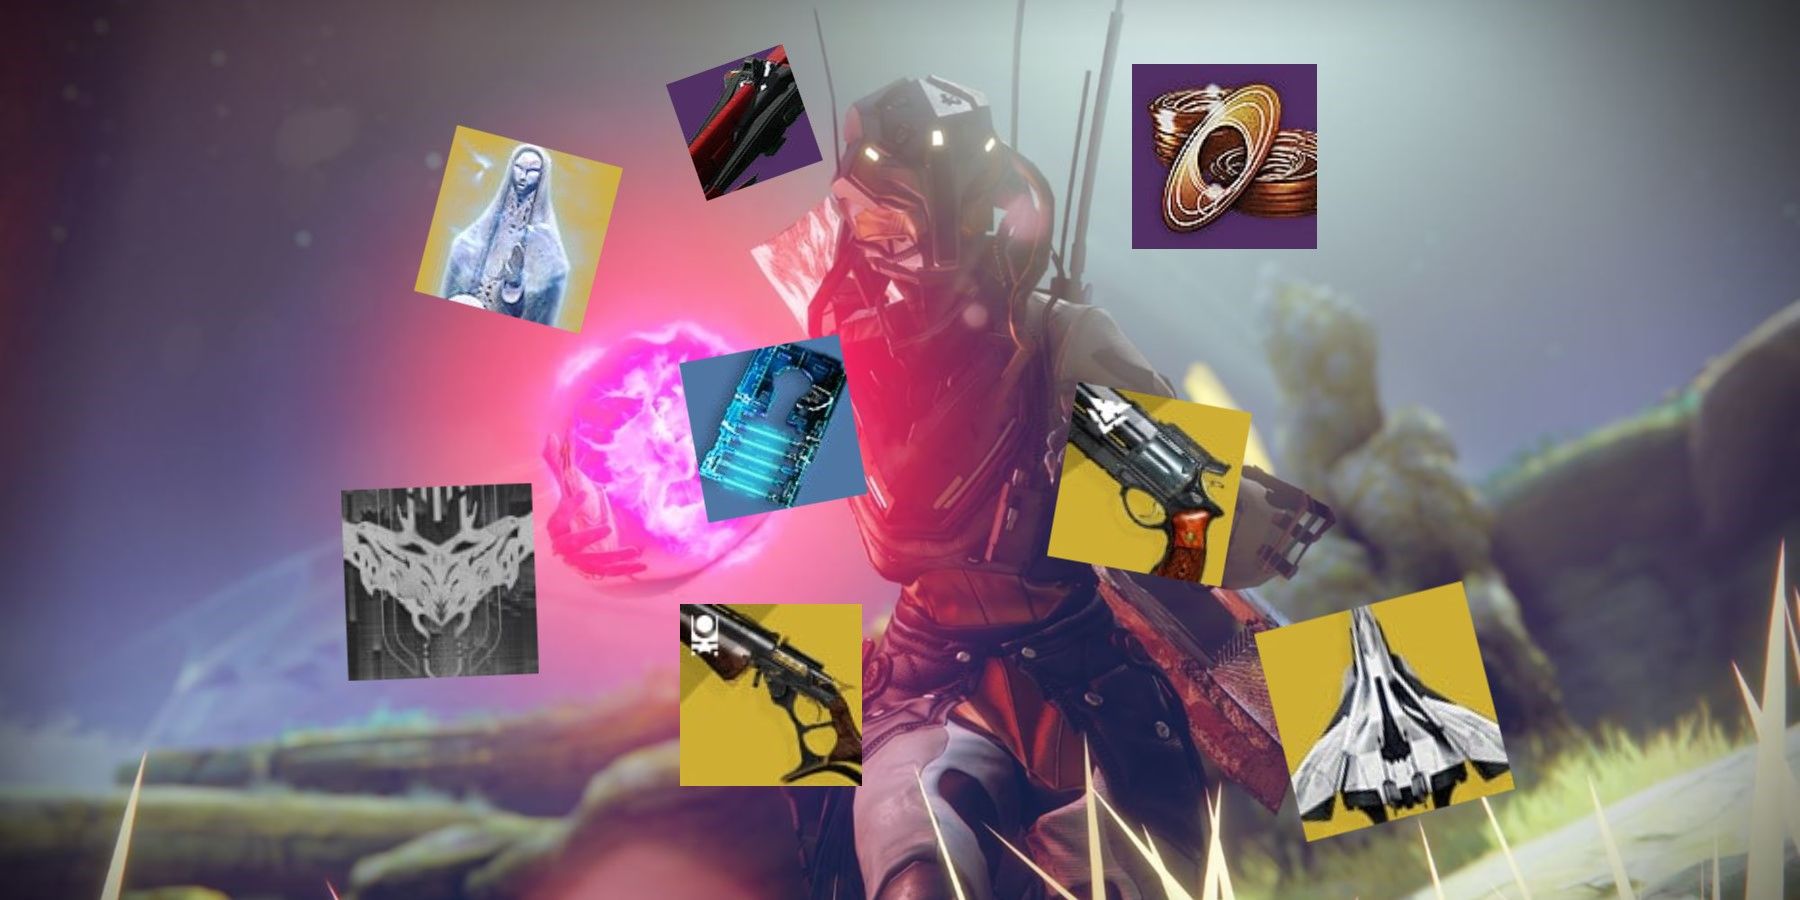 destiny 2 the witch queen everything destiny content vault seasonal items forsaken campaign tangled shore helm currency emblems exotics triumphs